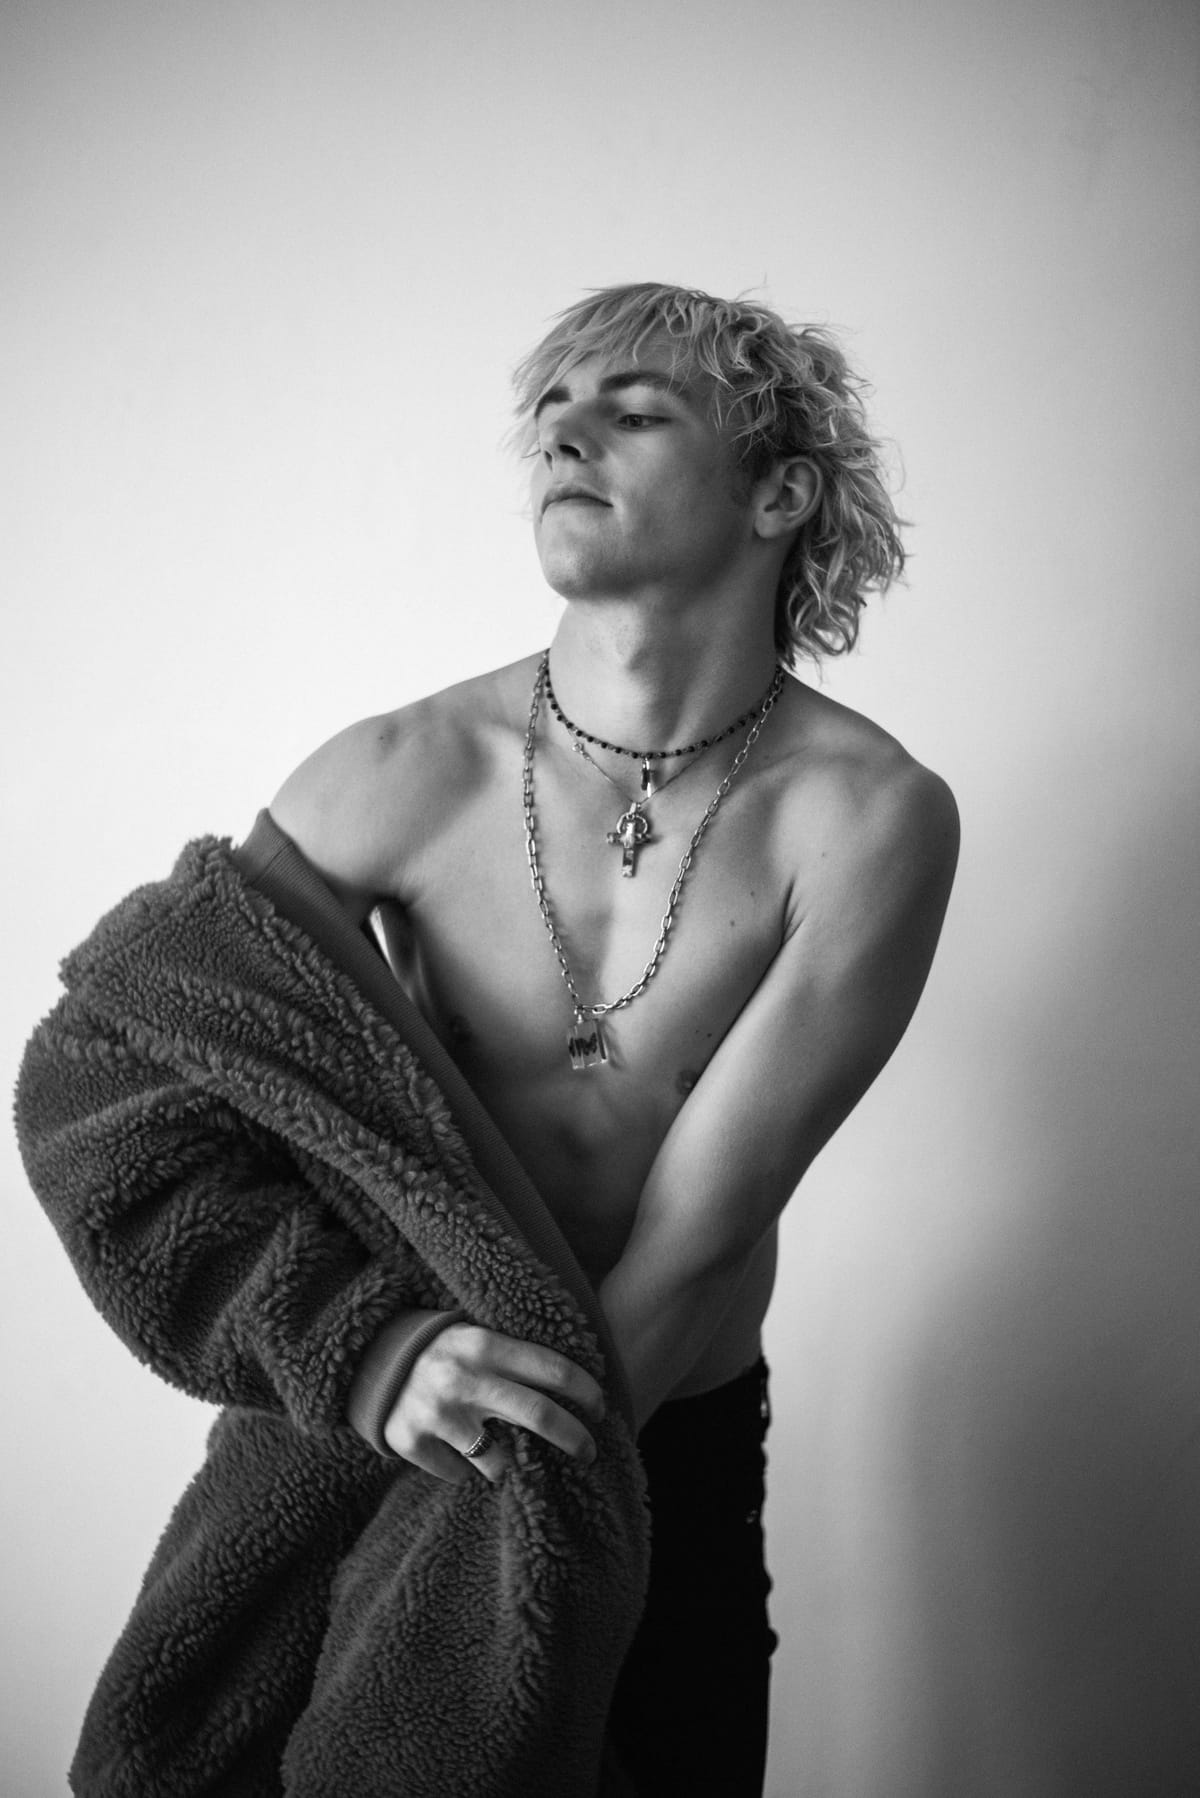 Brown hoodie by Stella McCartney, jeans by Agolde. Neckless by Palace Costume. Ross Lynch by Theo Gosselin for Monrowe Magazine Spring 2017